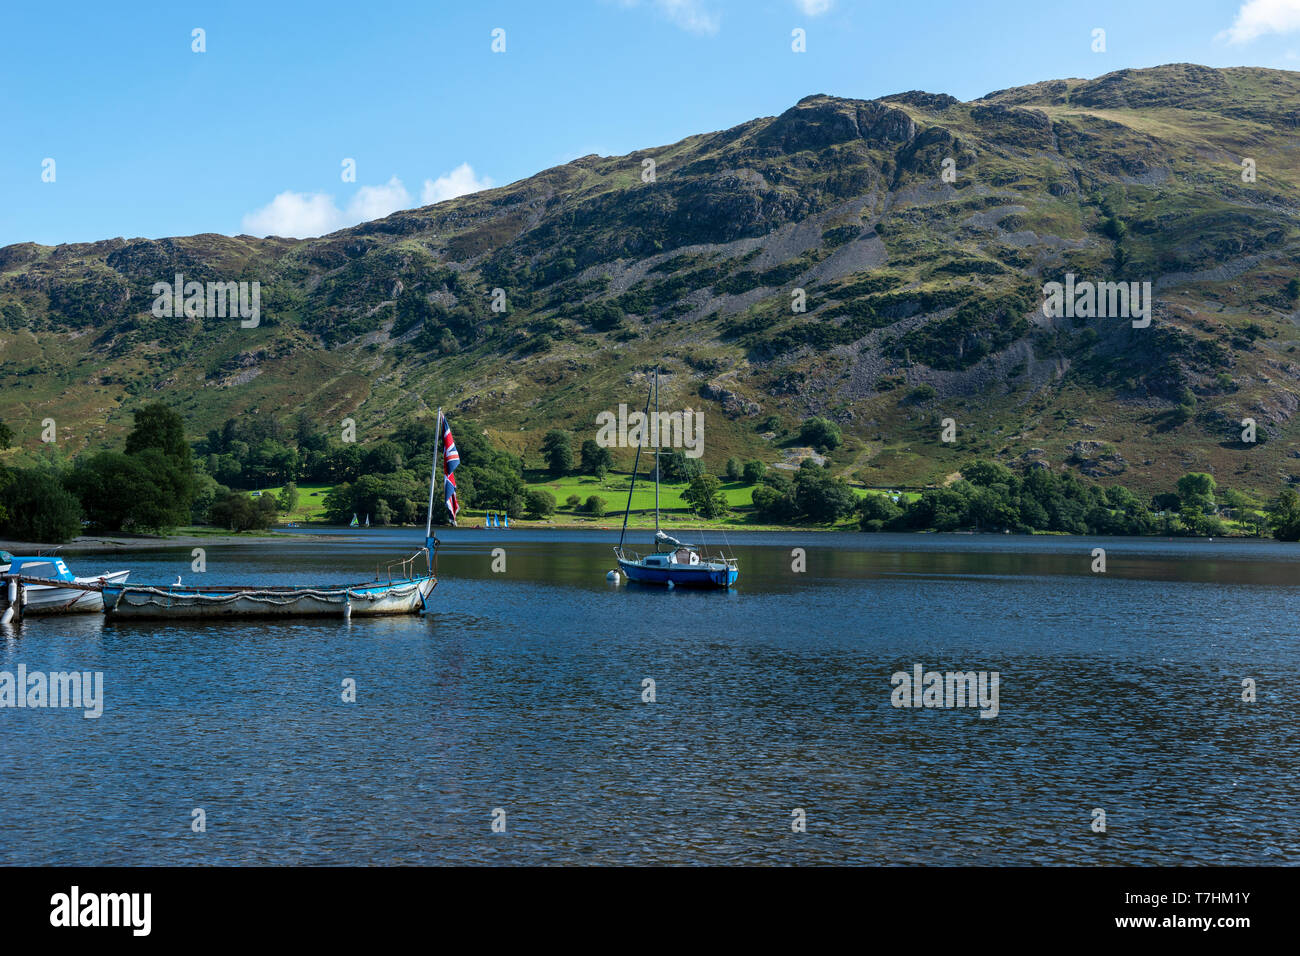 View across Ullswater from St Patrick's Boat Landing in the Lake District National Park, Cumbria, England, UK Stock Photo